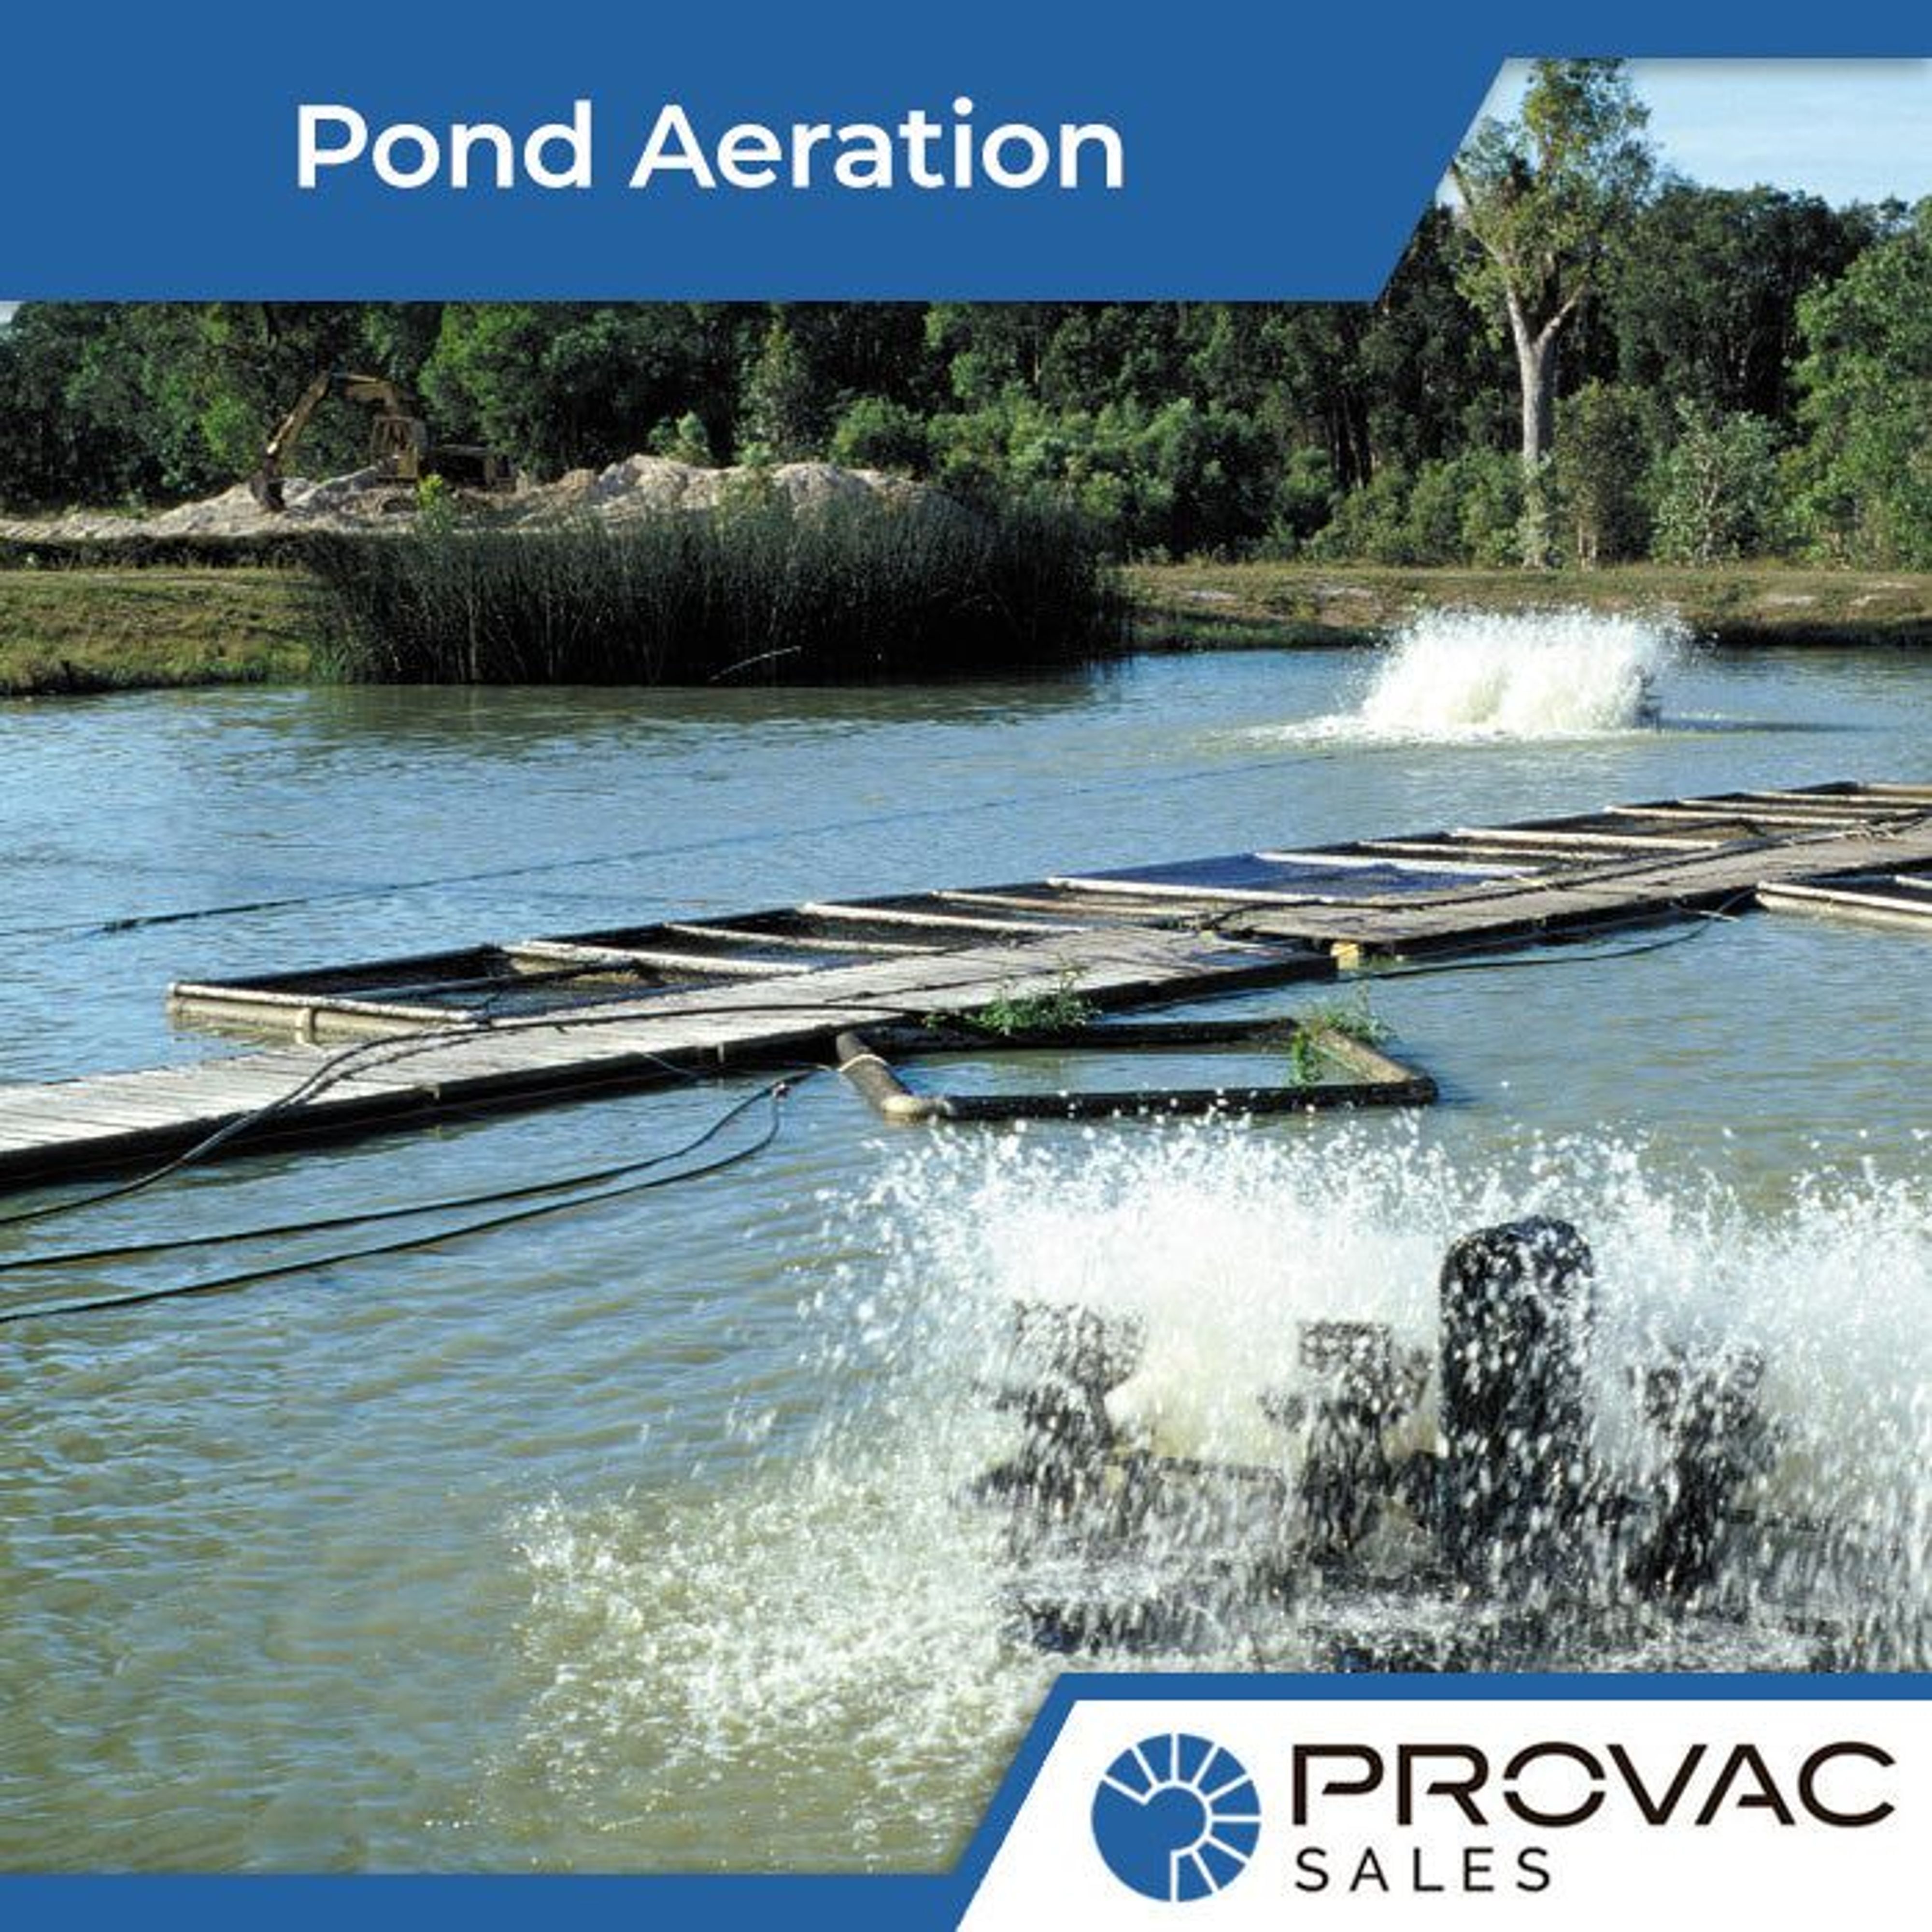 Prawn & Fish Pond Aeration, and How Vacuum Pumps Help Background